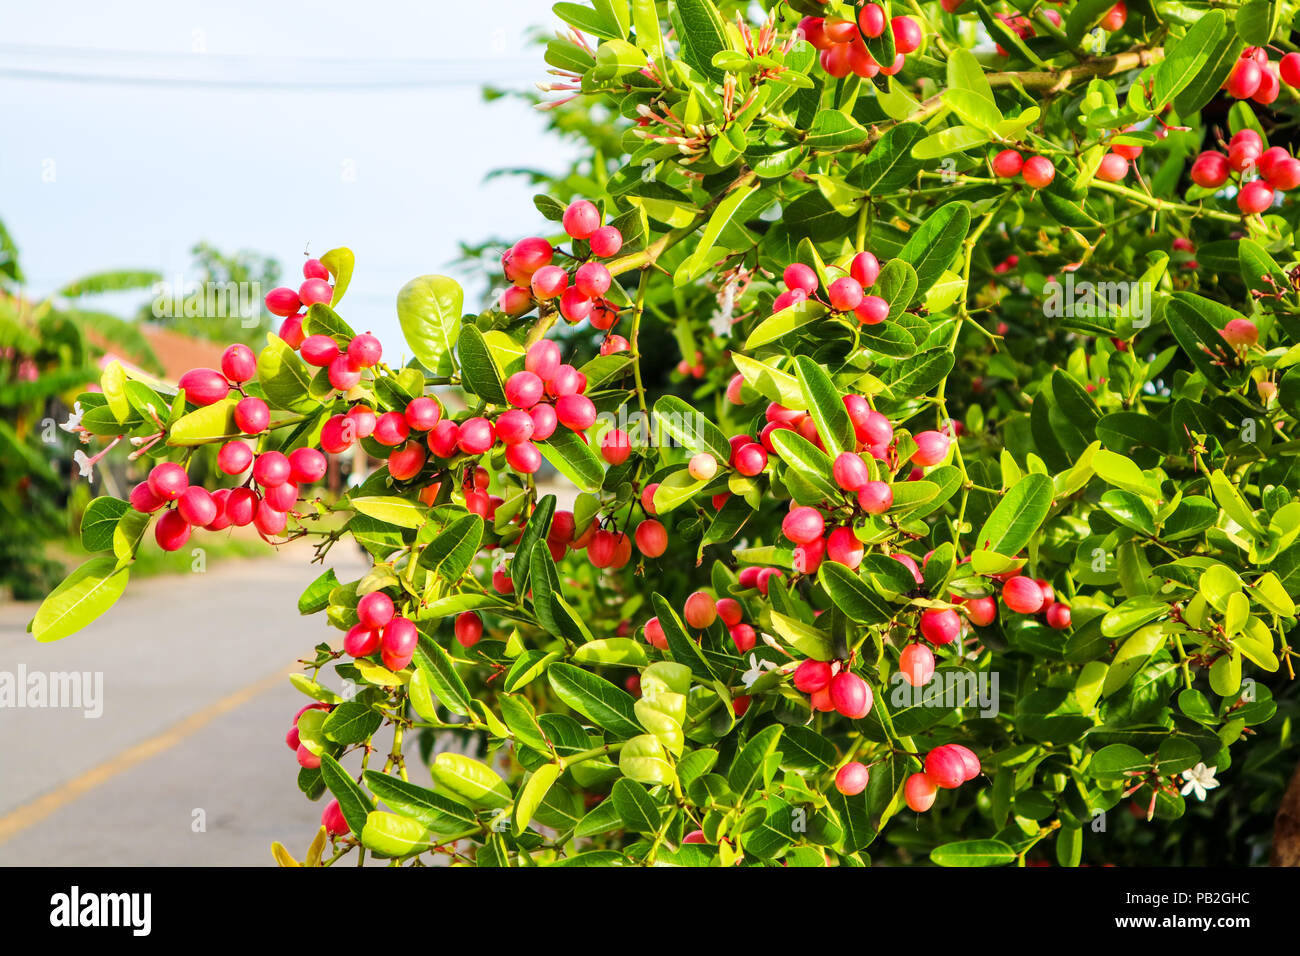 Carunda or Karonda fruit used to herb and medicine, red berry fruit and green leaves Stock Photo